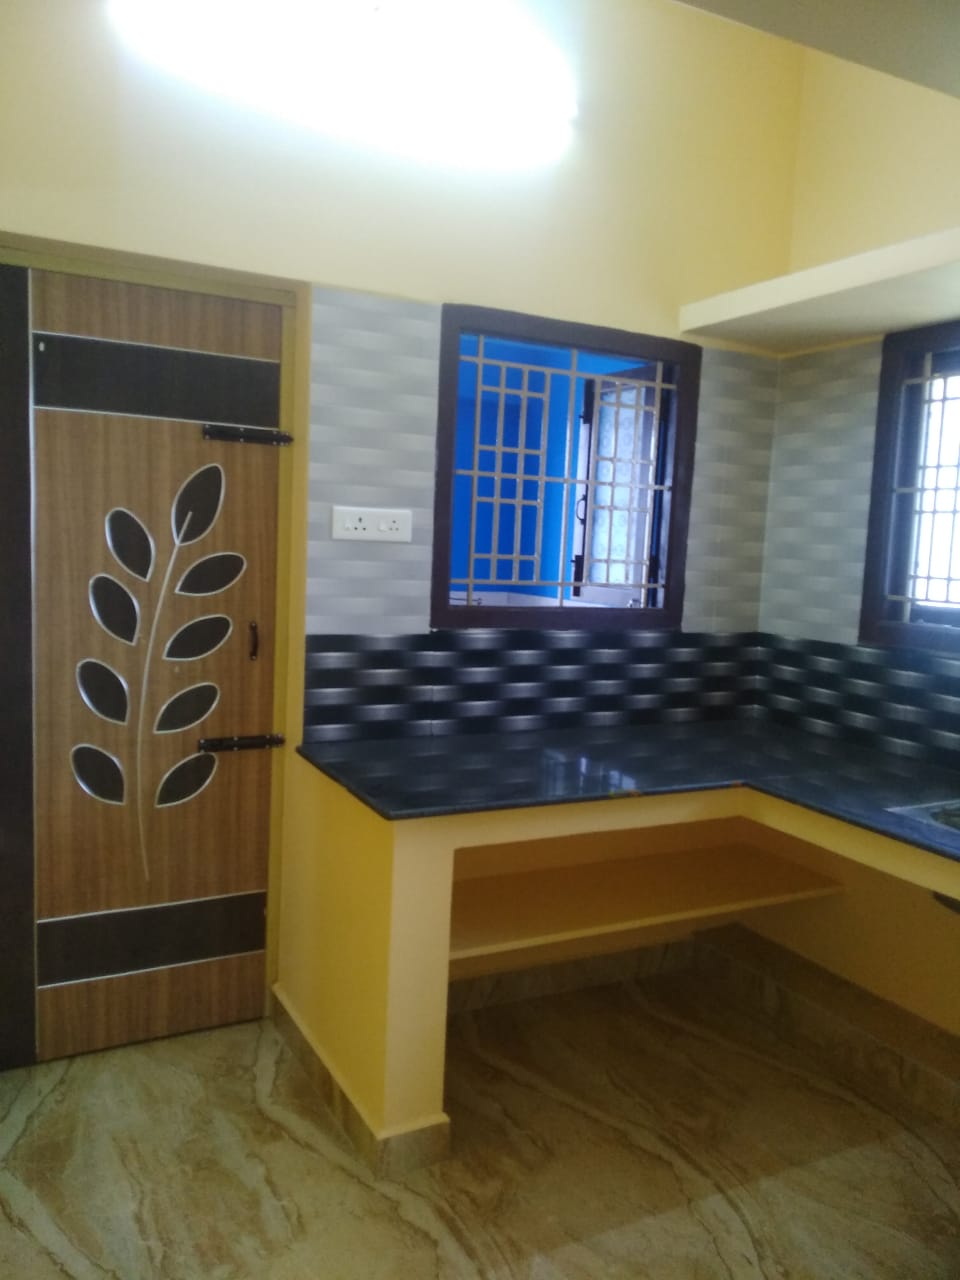 9809-for-rent-2BHK-Residential-House-Semi-Furnished-Monthly-rs-8000-in-Villianur-Odiampet-Puducherry-Pondicherry